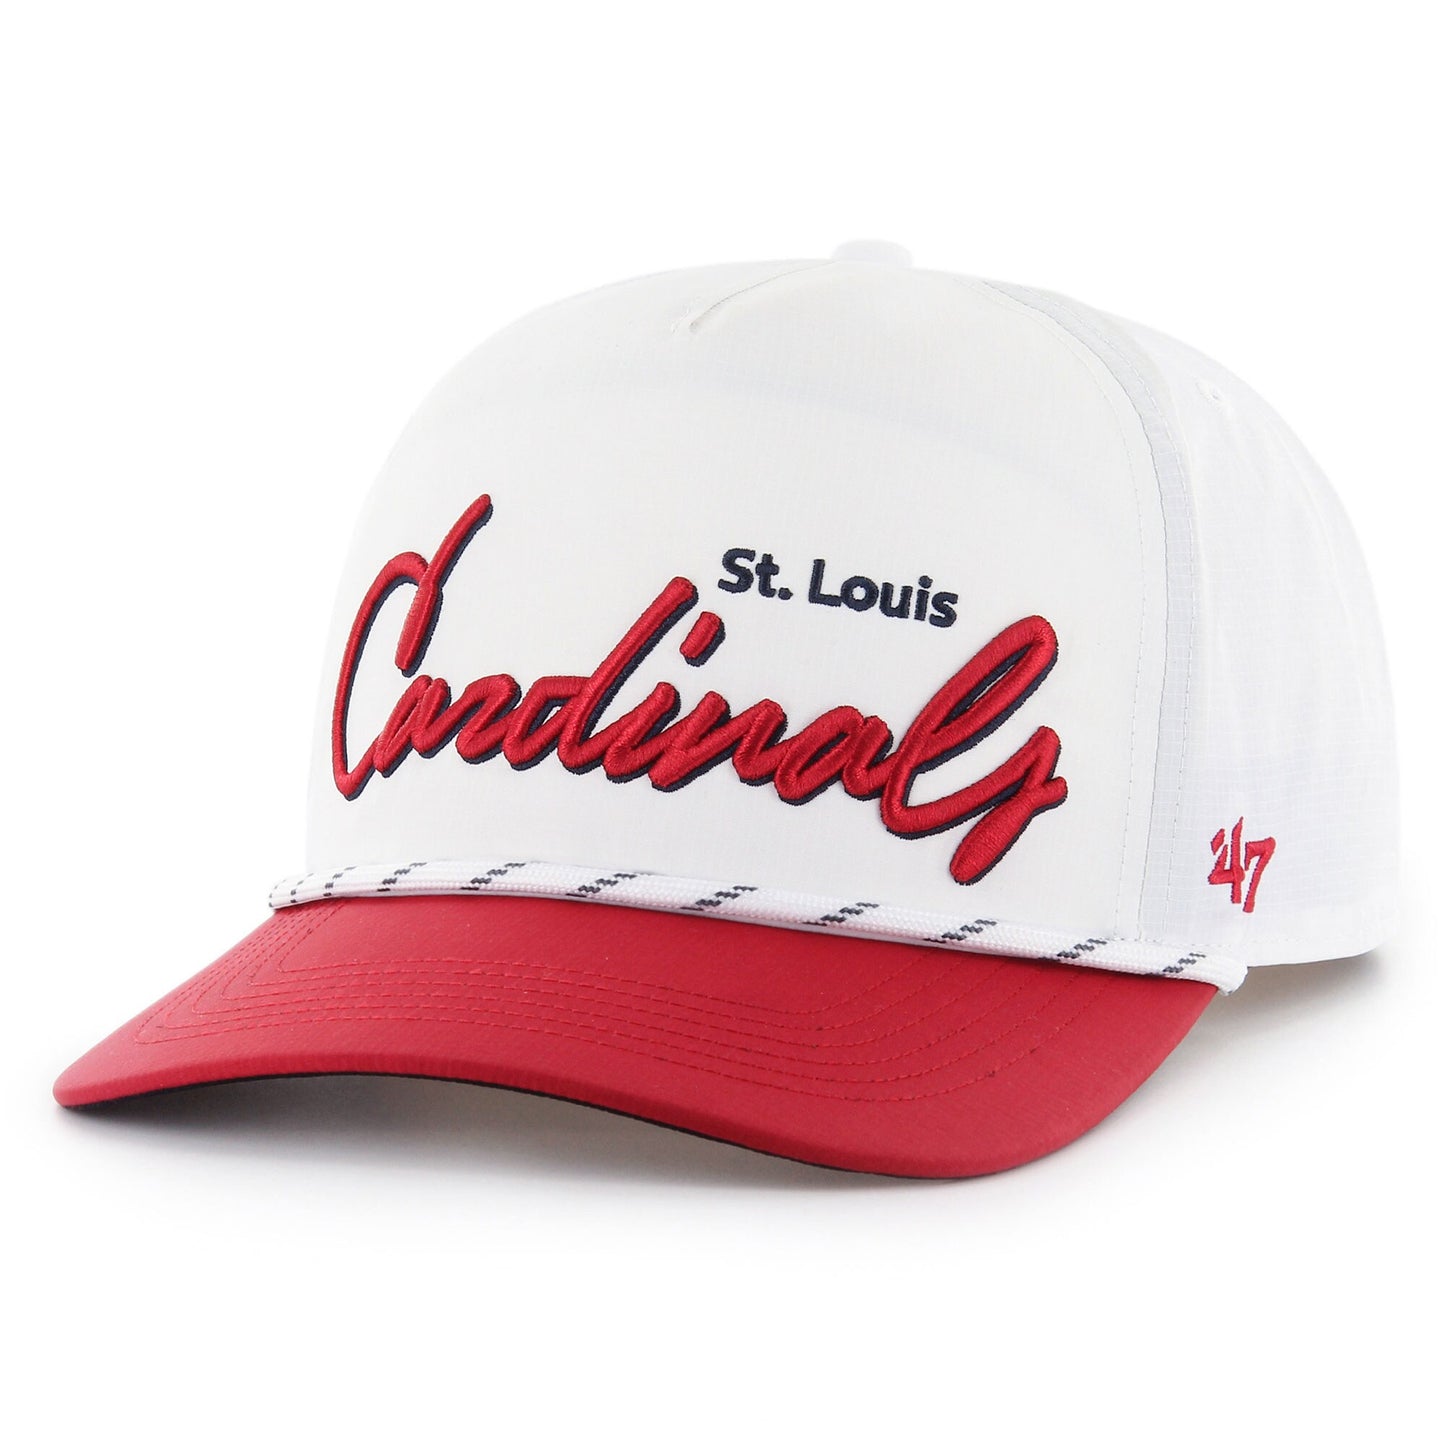 St. Louis Cardinals '47 Chamberlain Hitch Adjustable Hat - White